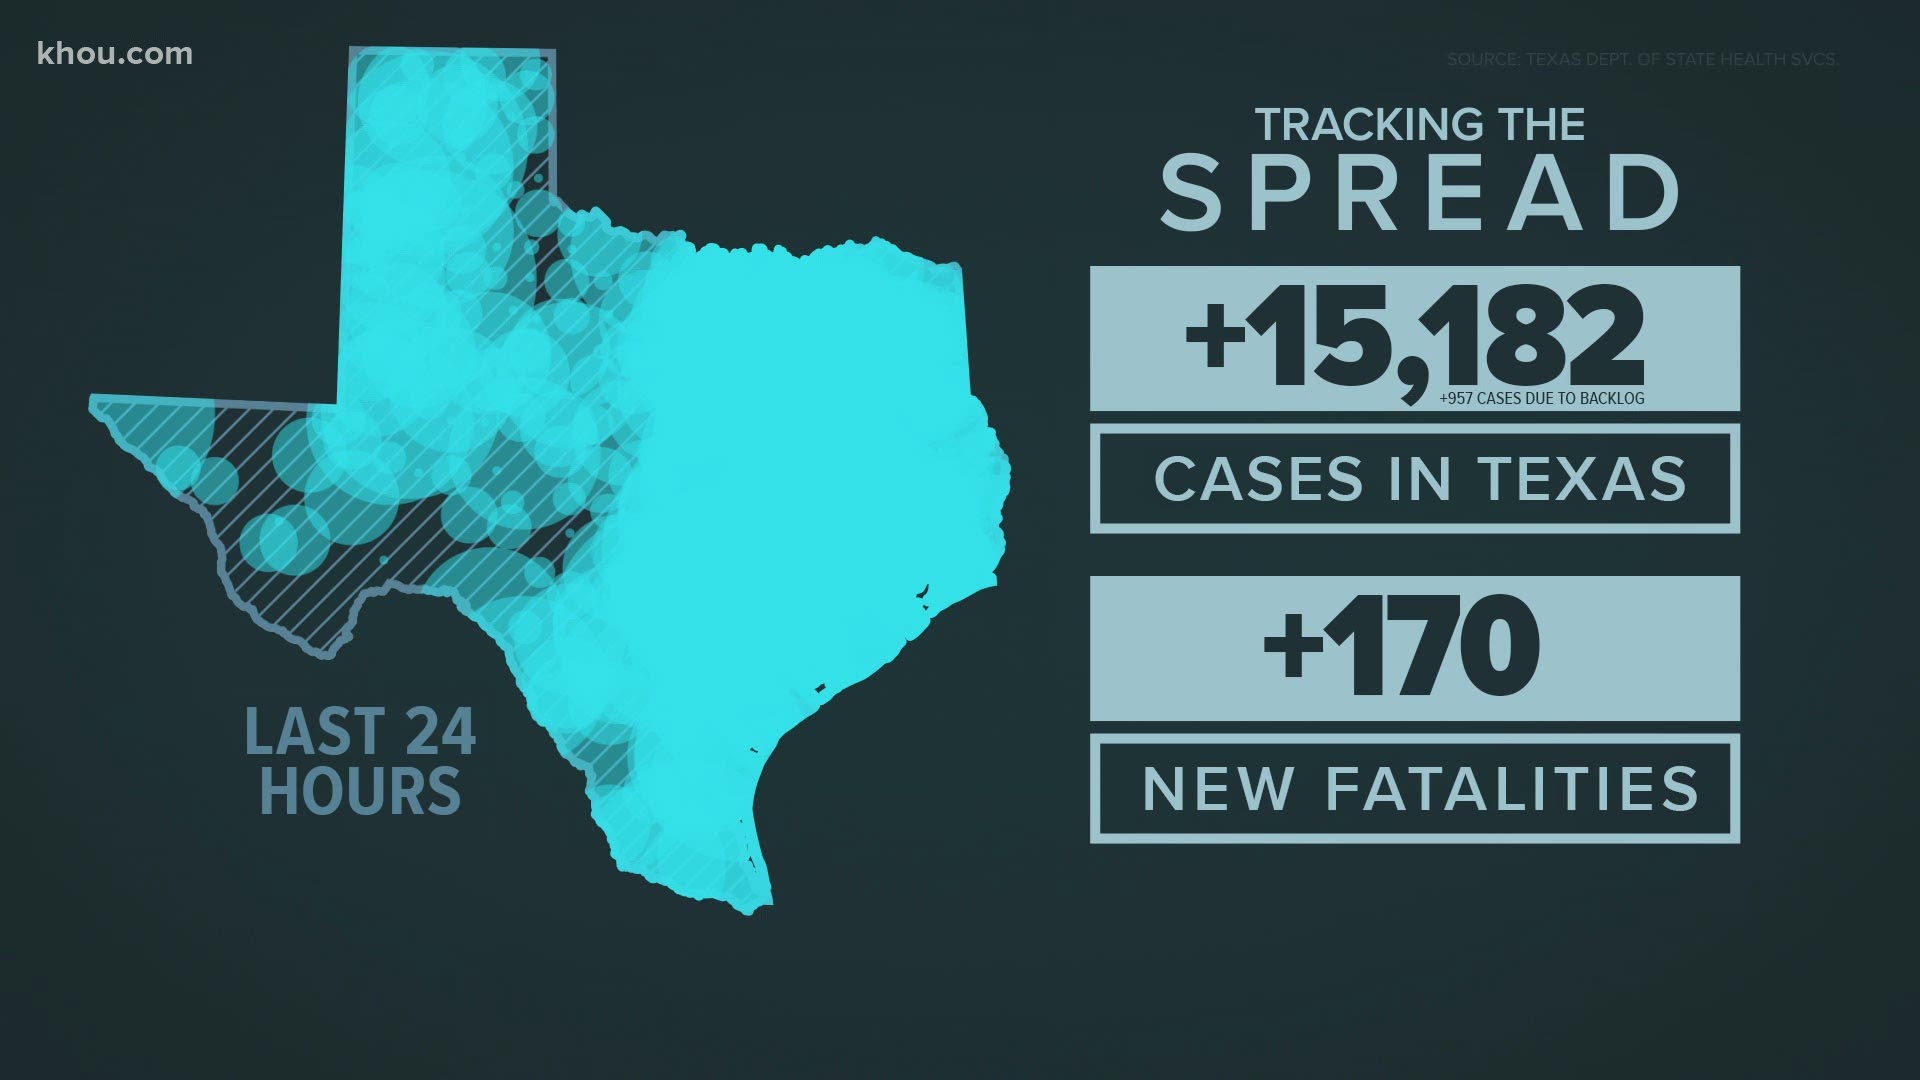 The average daily cases in Texas nearly doubled, from 4,340 in October, to 8,372 in November.